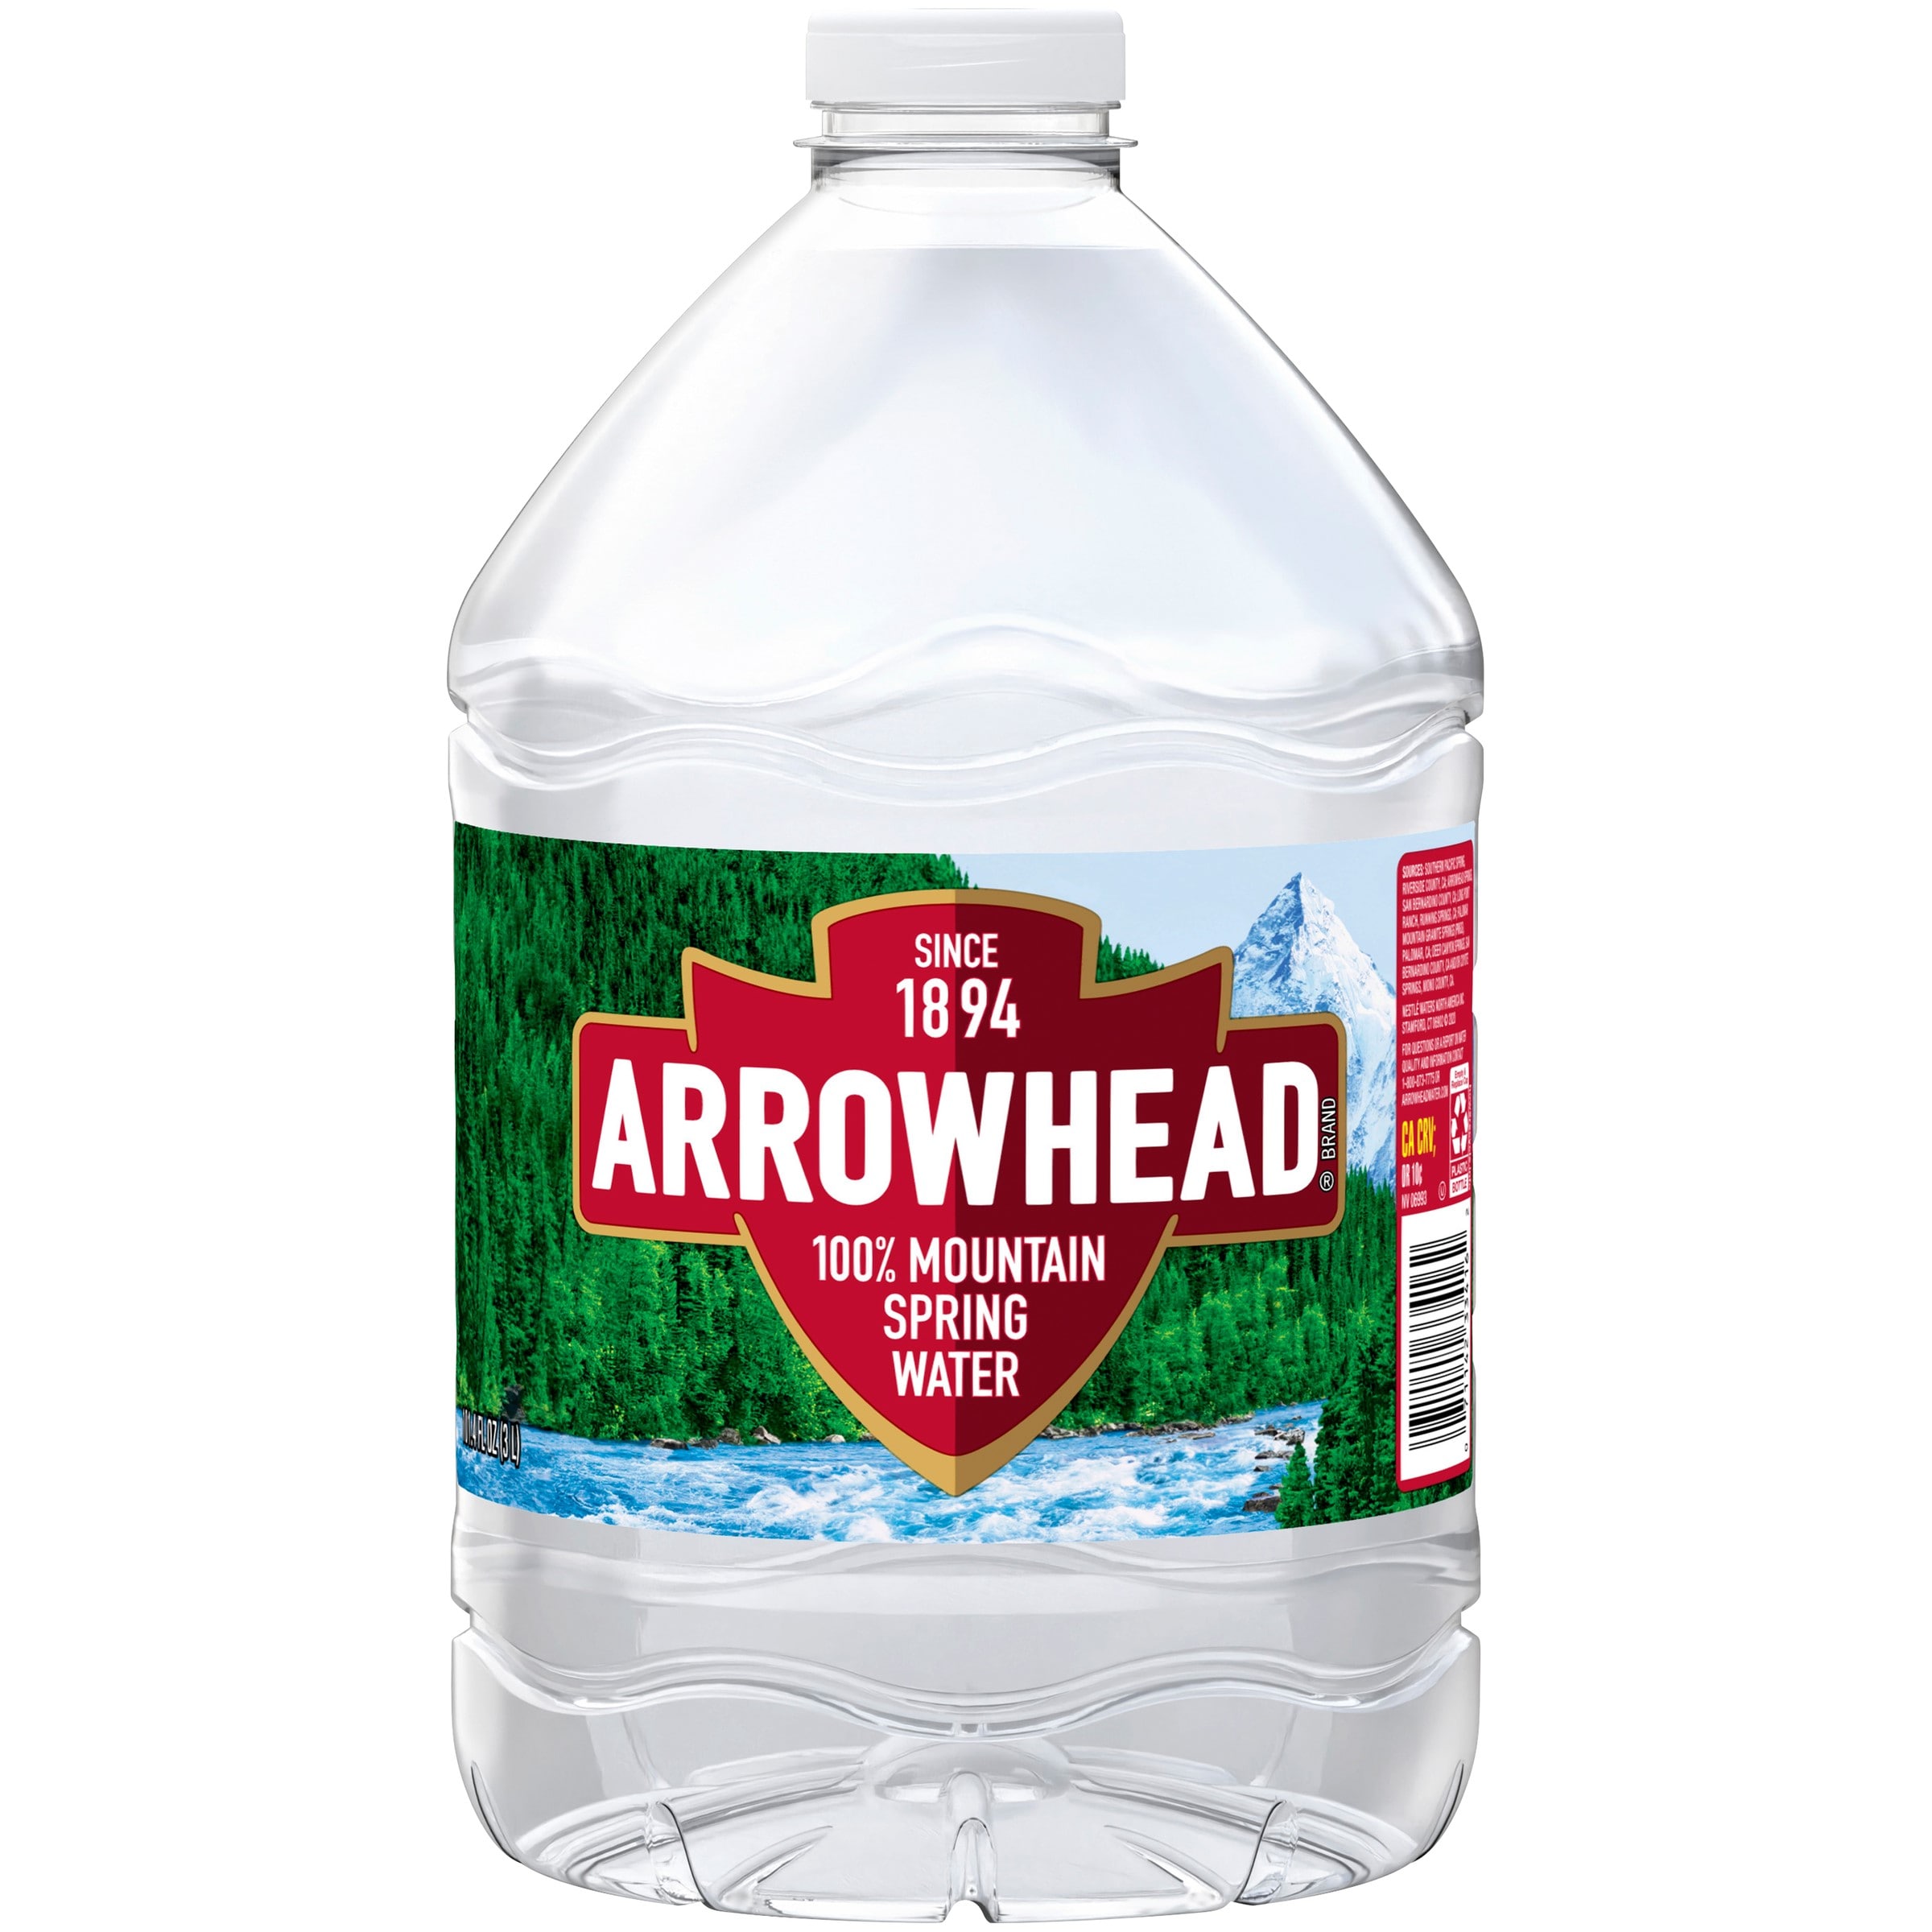 The Water Bottle of the Future - The Arrowhead